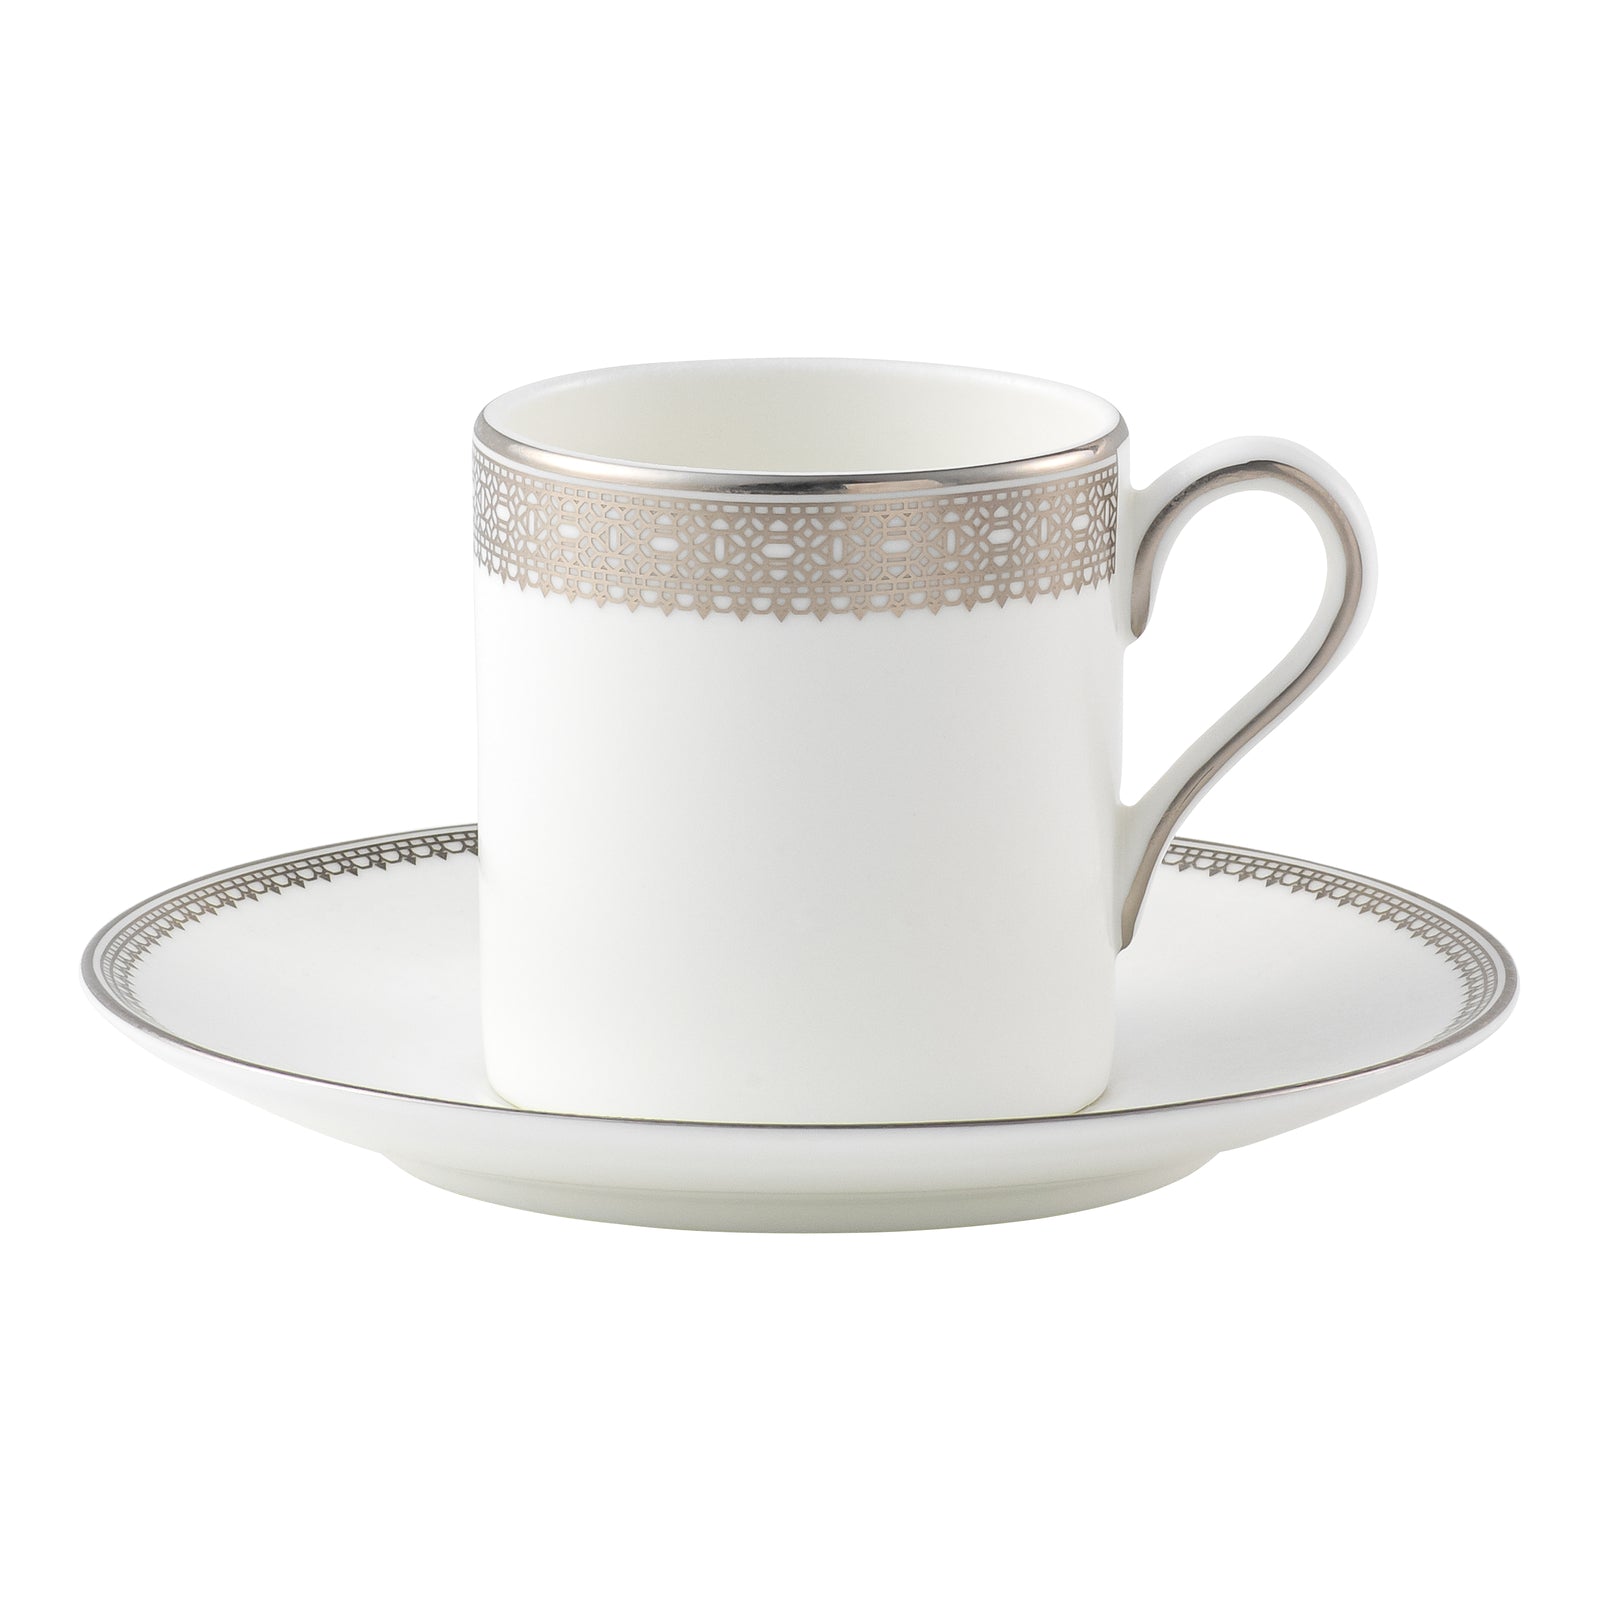 Wedgwood Vera Wang Lace Platinum Coffee Cup and Saucer - Set of 2